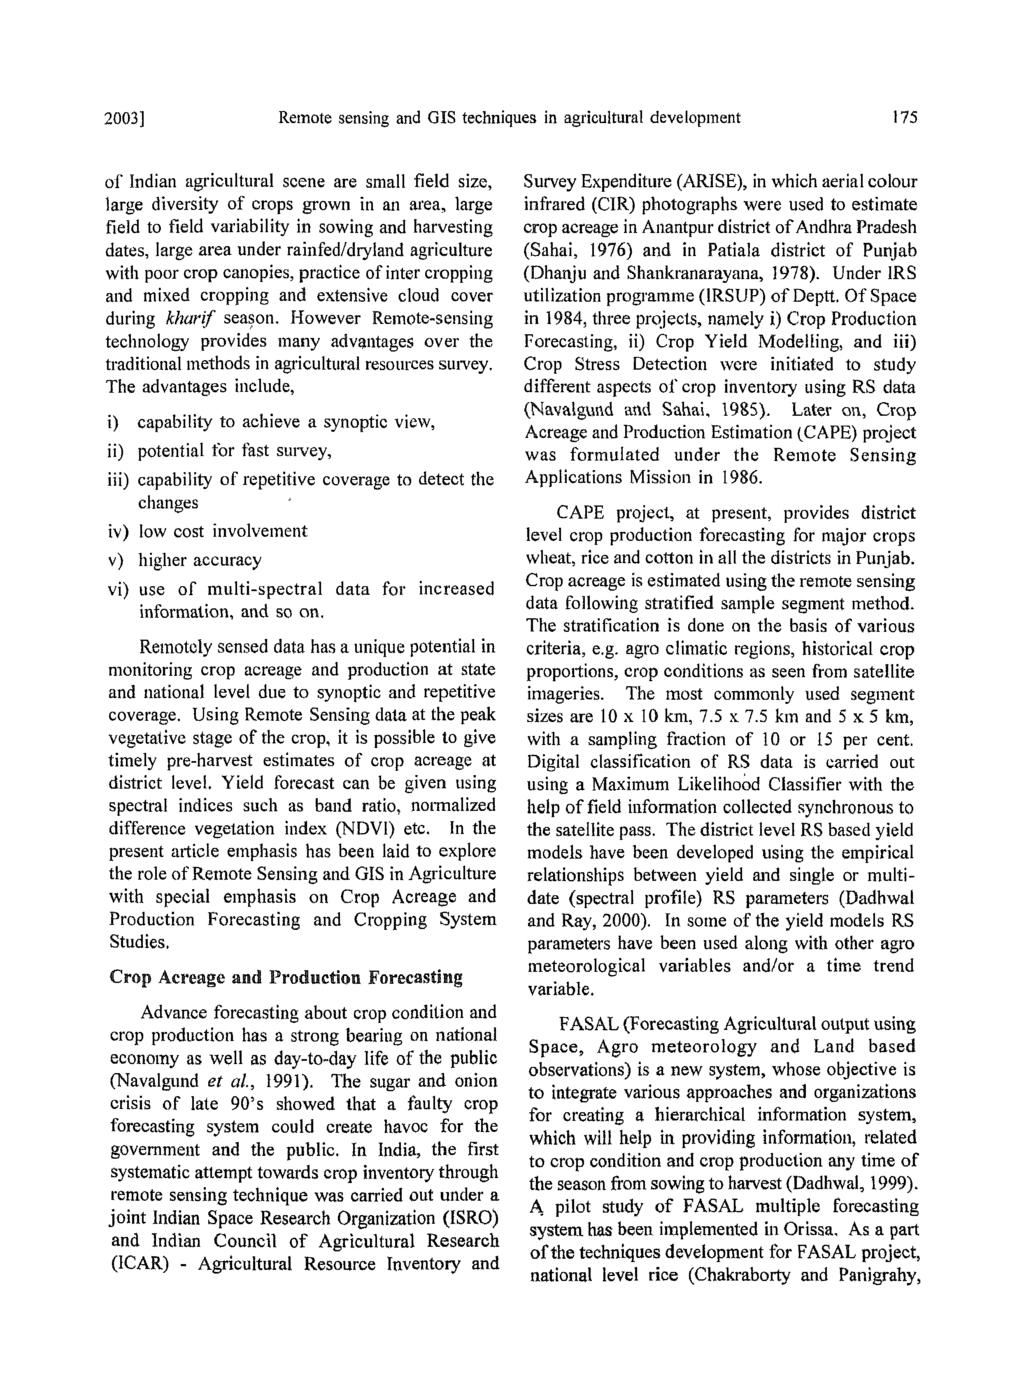 2003] Remote sensing and GIS techniques in agricultural development 175 of Indian agricultural scene are small field size, large diversity of crops grown in an area, large field to field variability